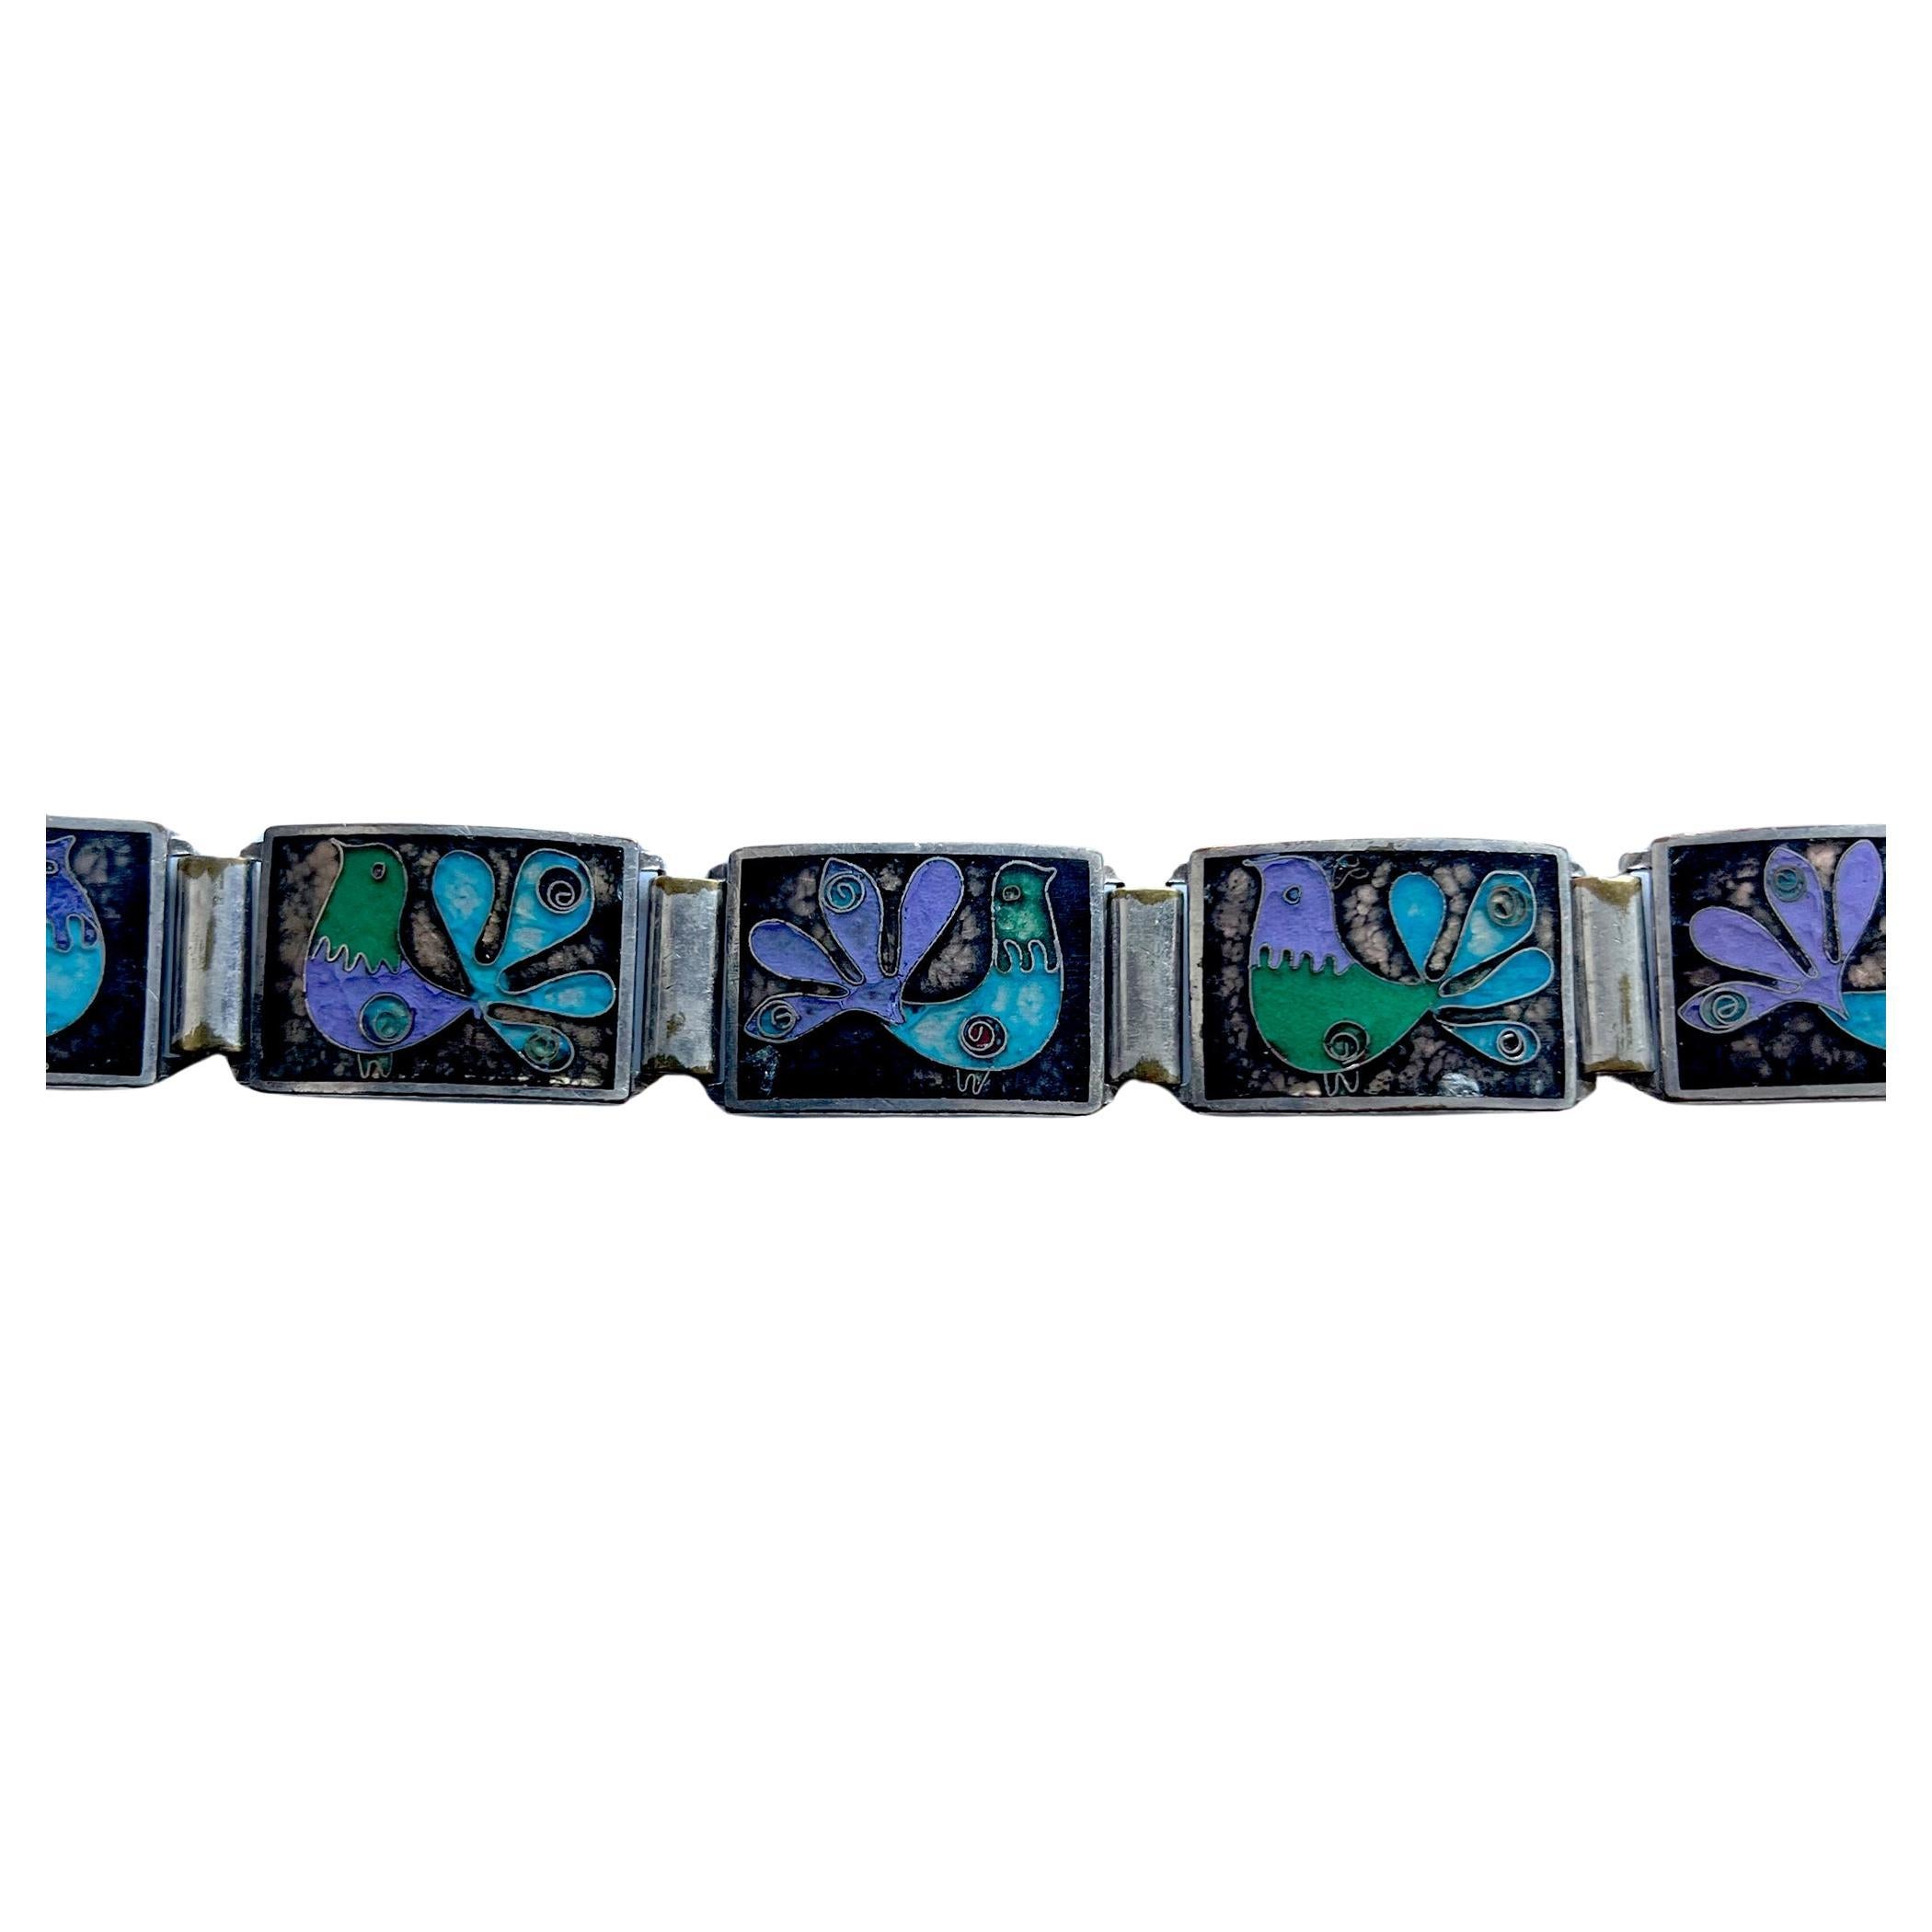 German modernist silver and enamel bracelet designed by Perli, circa 1950s.  Blue, purple and green enamel birds enclosed in cloisonné on the front with and counter enamel on its back.  Bracelet measures 8